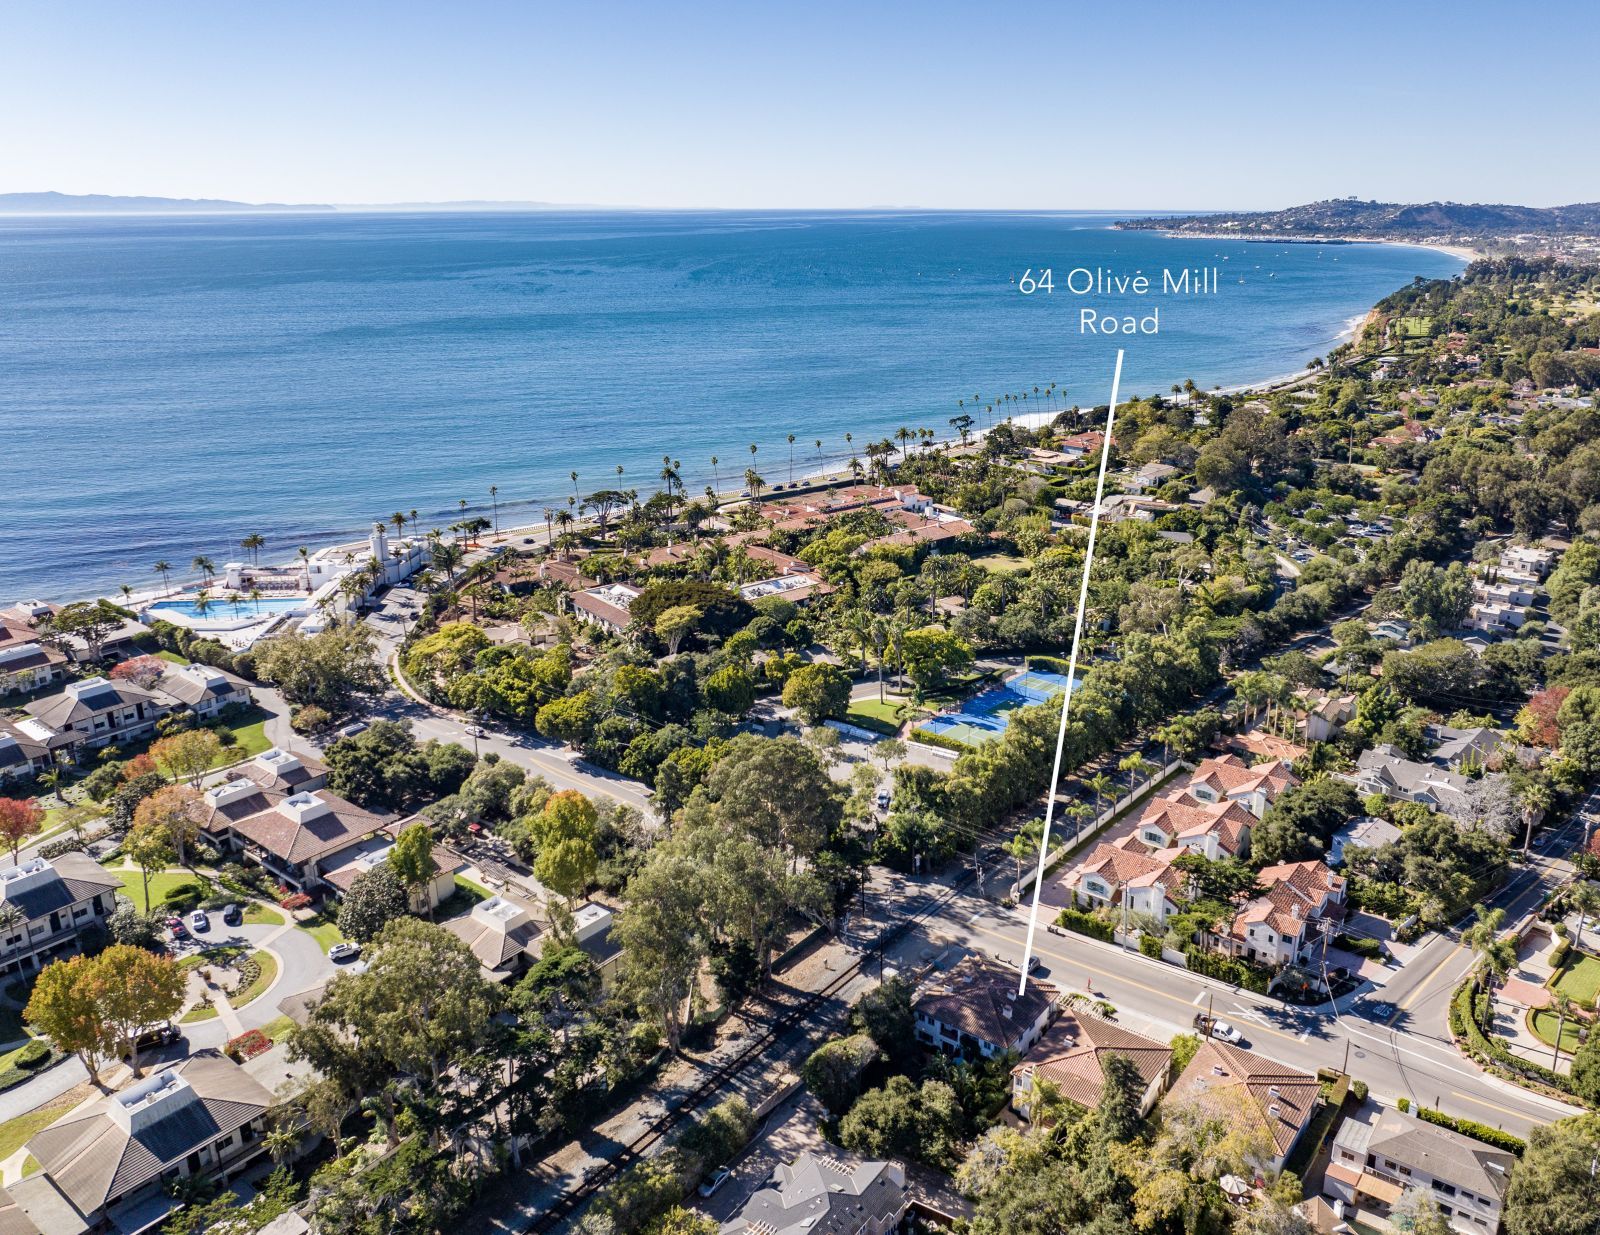 A birds eye view of Montecito with it's beaches in the b and ocean in the background and an arrow pointing out one home in a neighborhood.